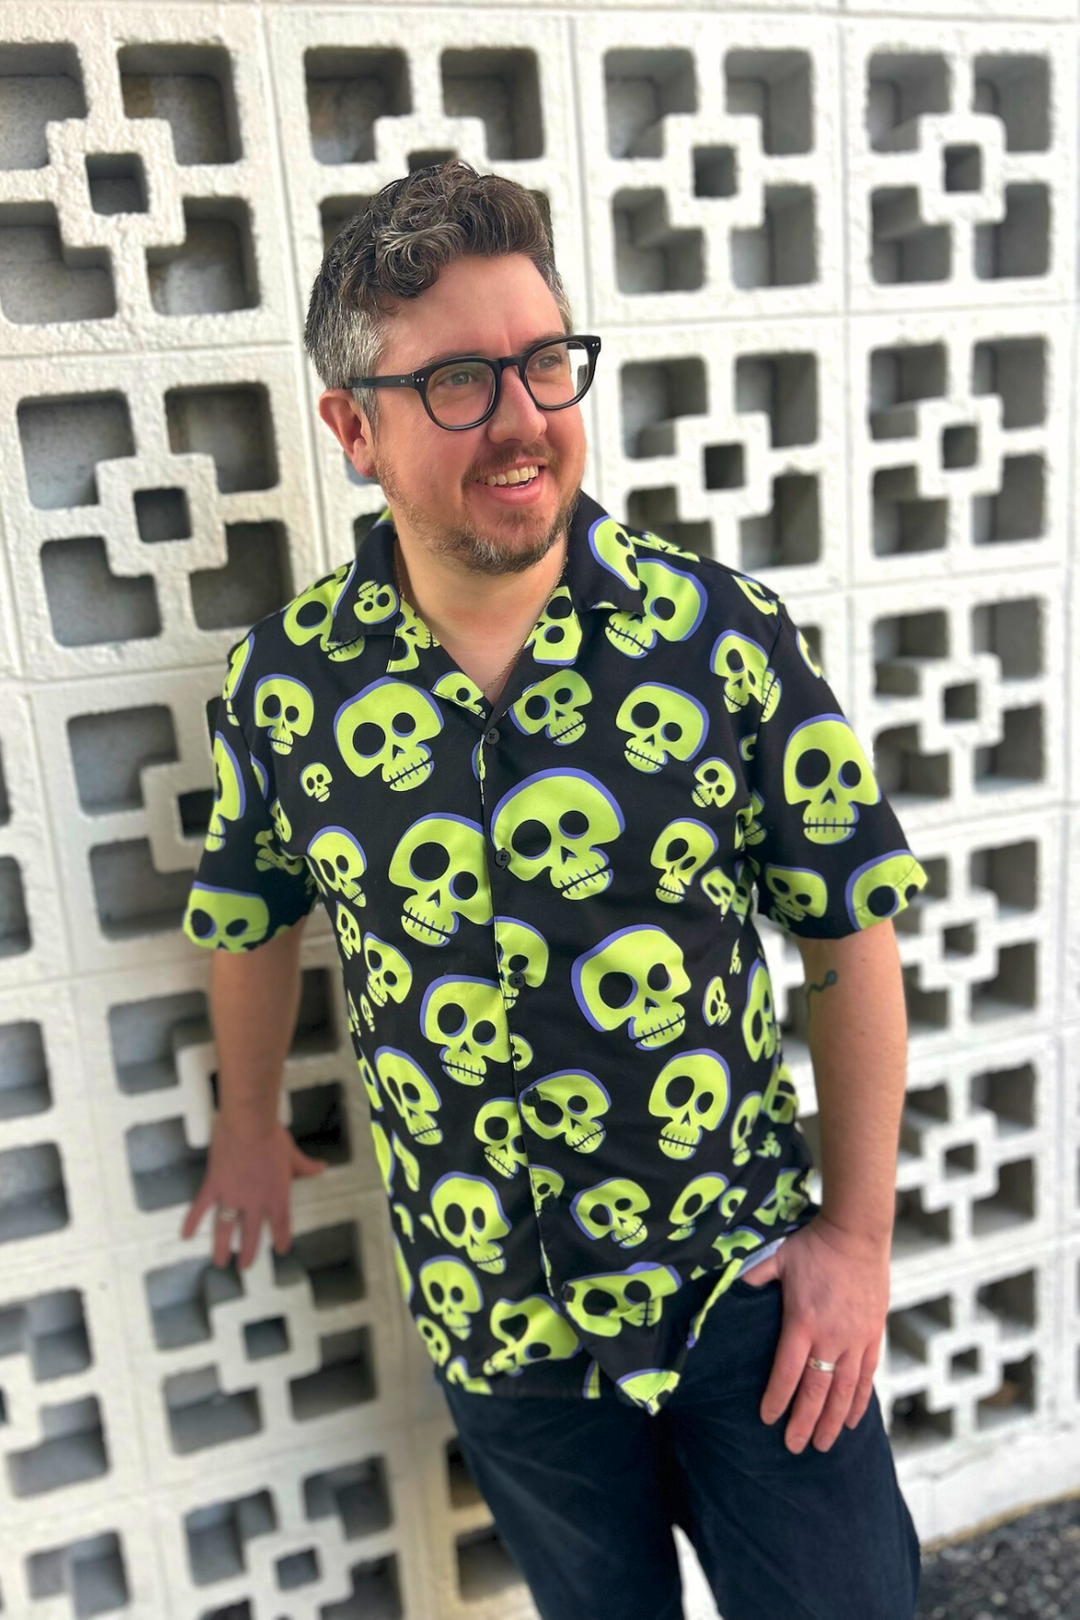 "The Zombie" button shirt